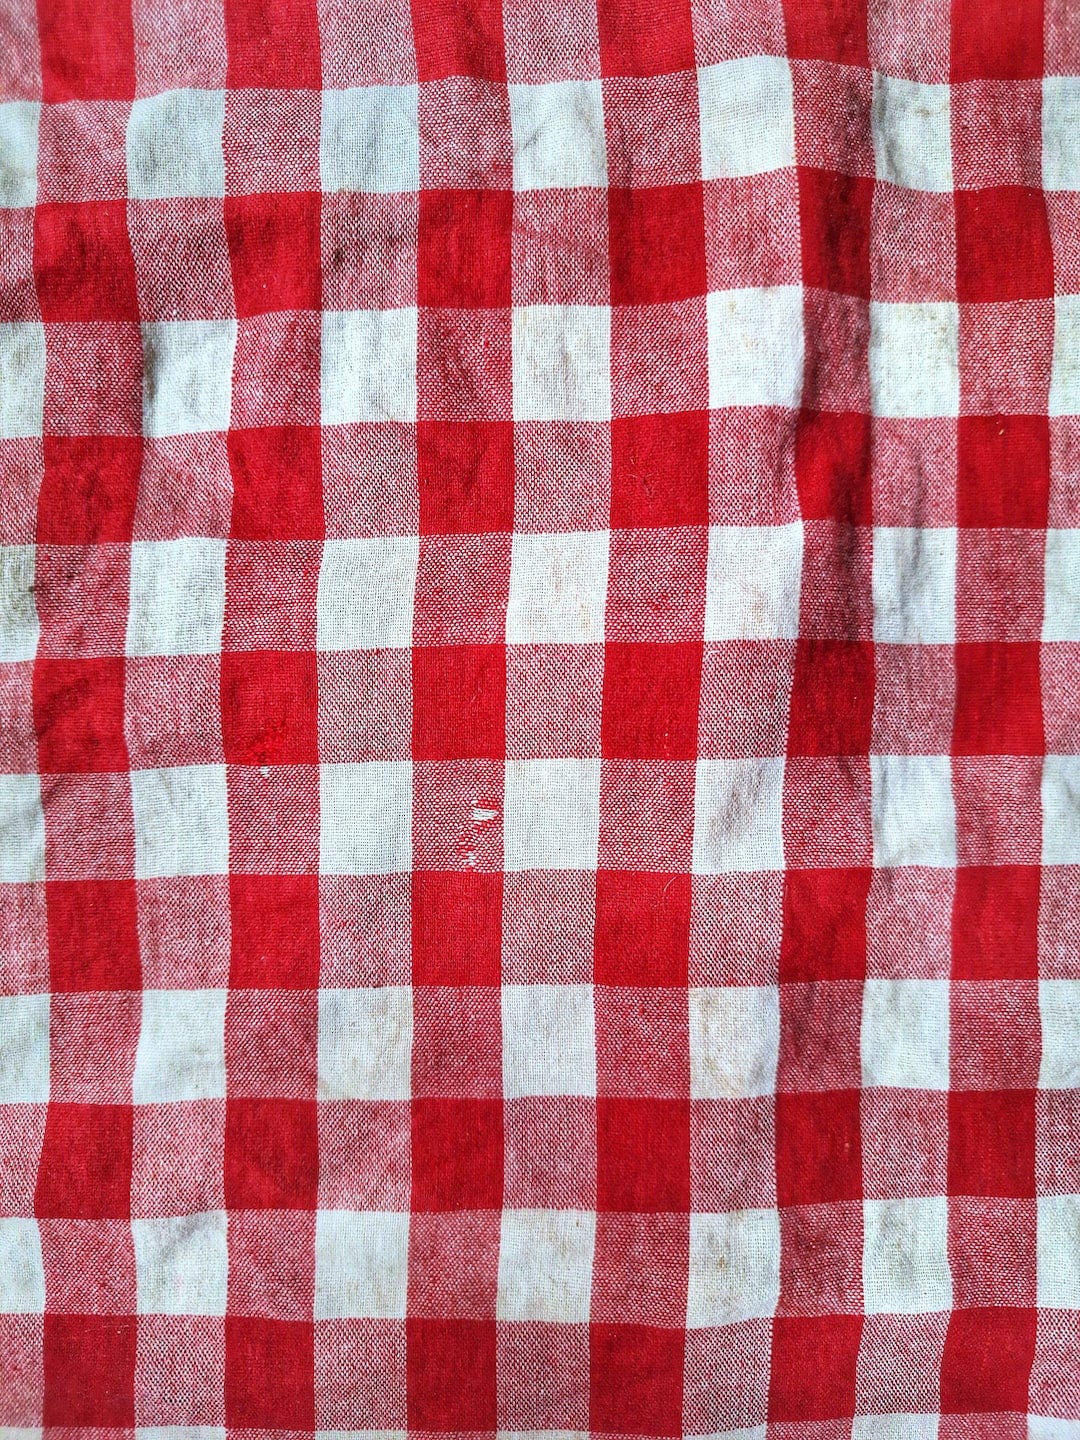 a red and white checkered table cloth